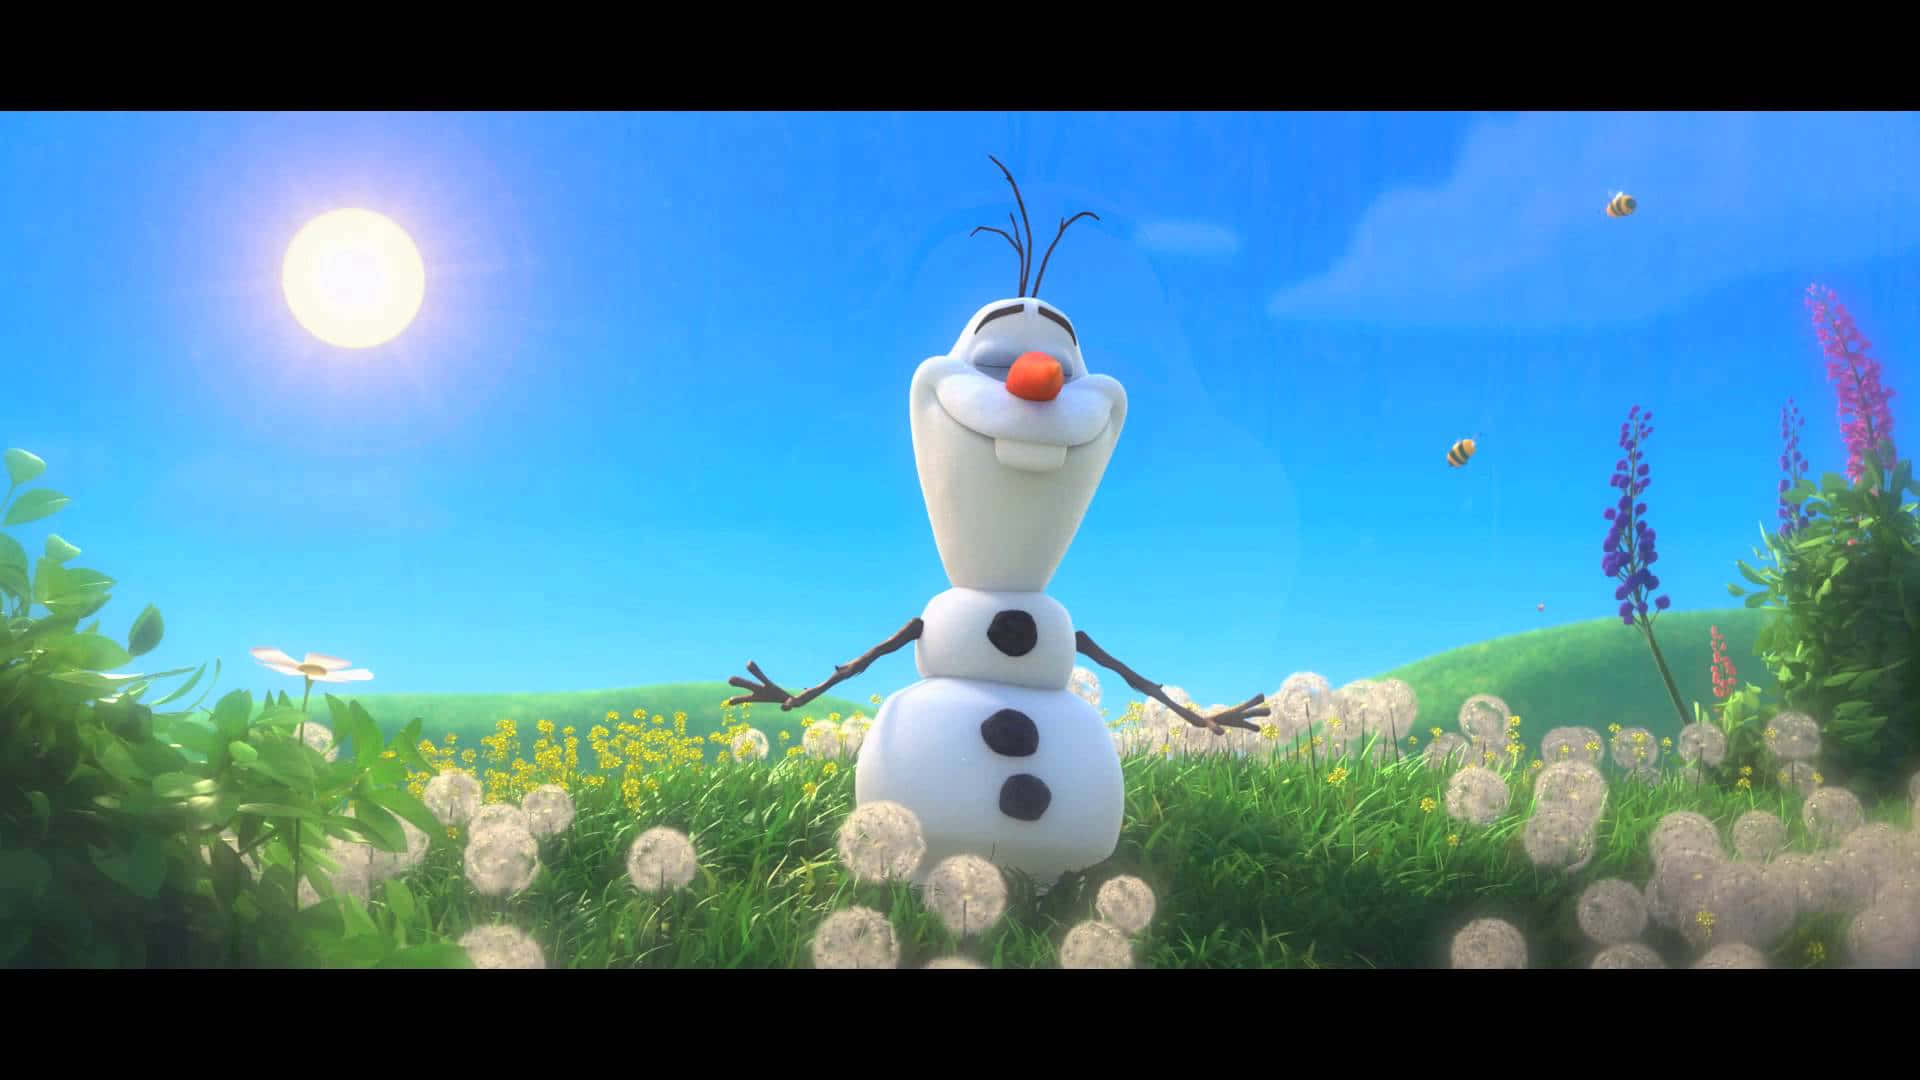 "Olaf takes a break in the sun and enjoys the warmth." Wallpaper